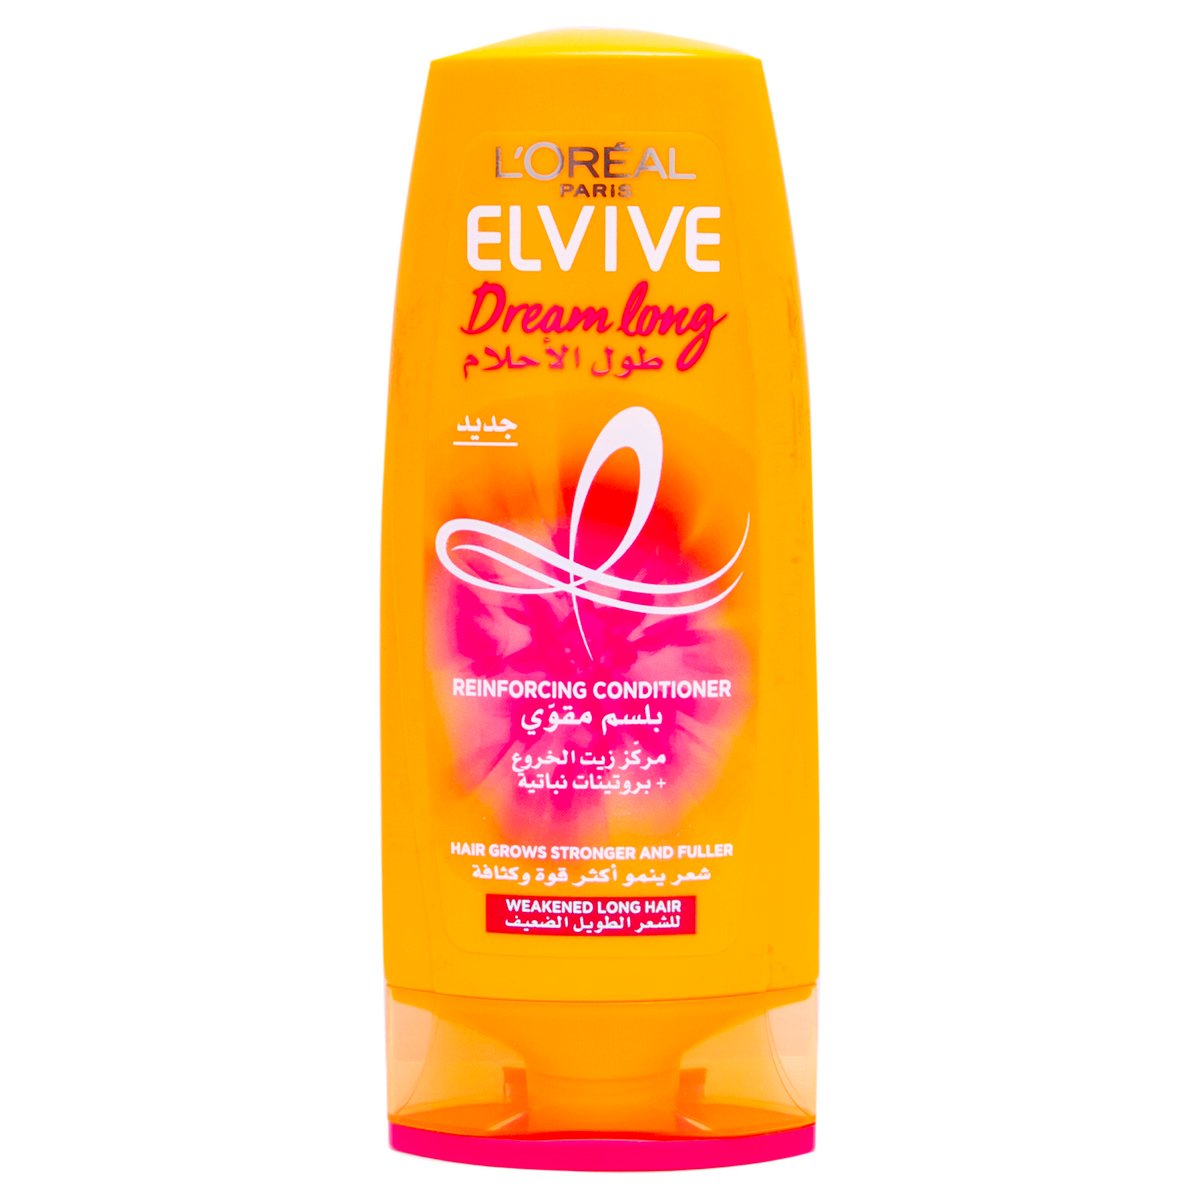 L'Oreal Elvive Dream Long Reinforcing Conditioner, 200 ml